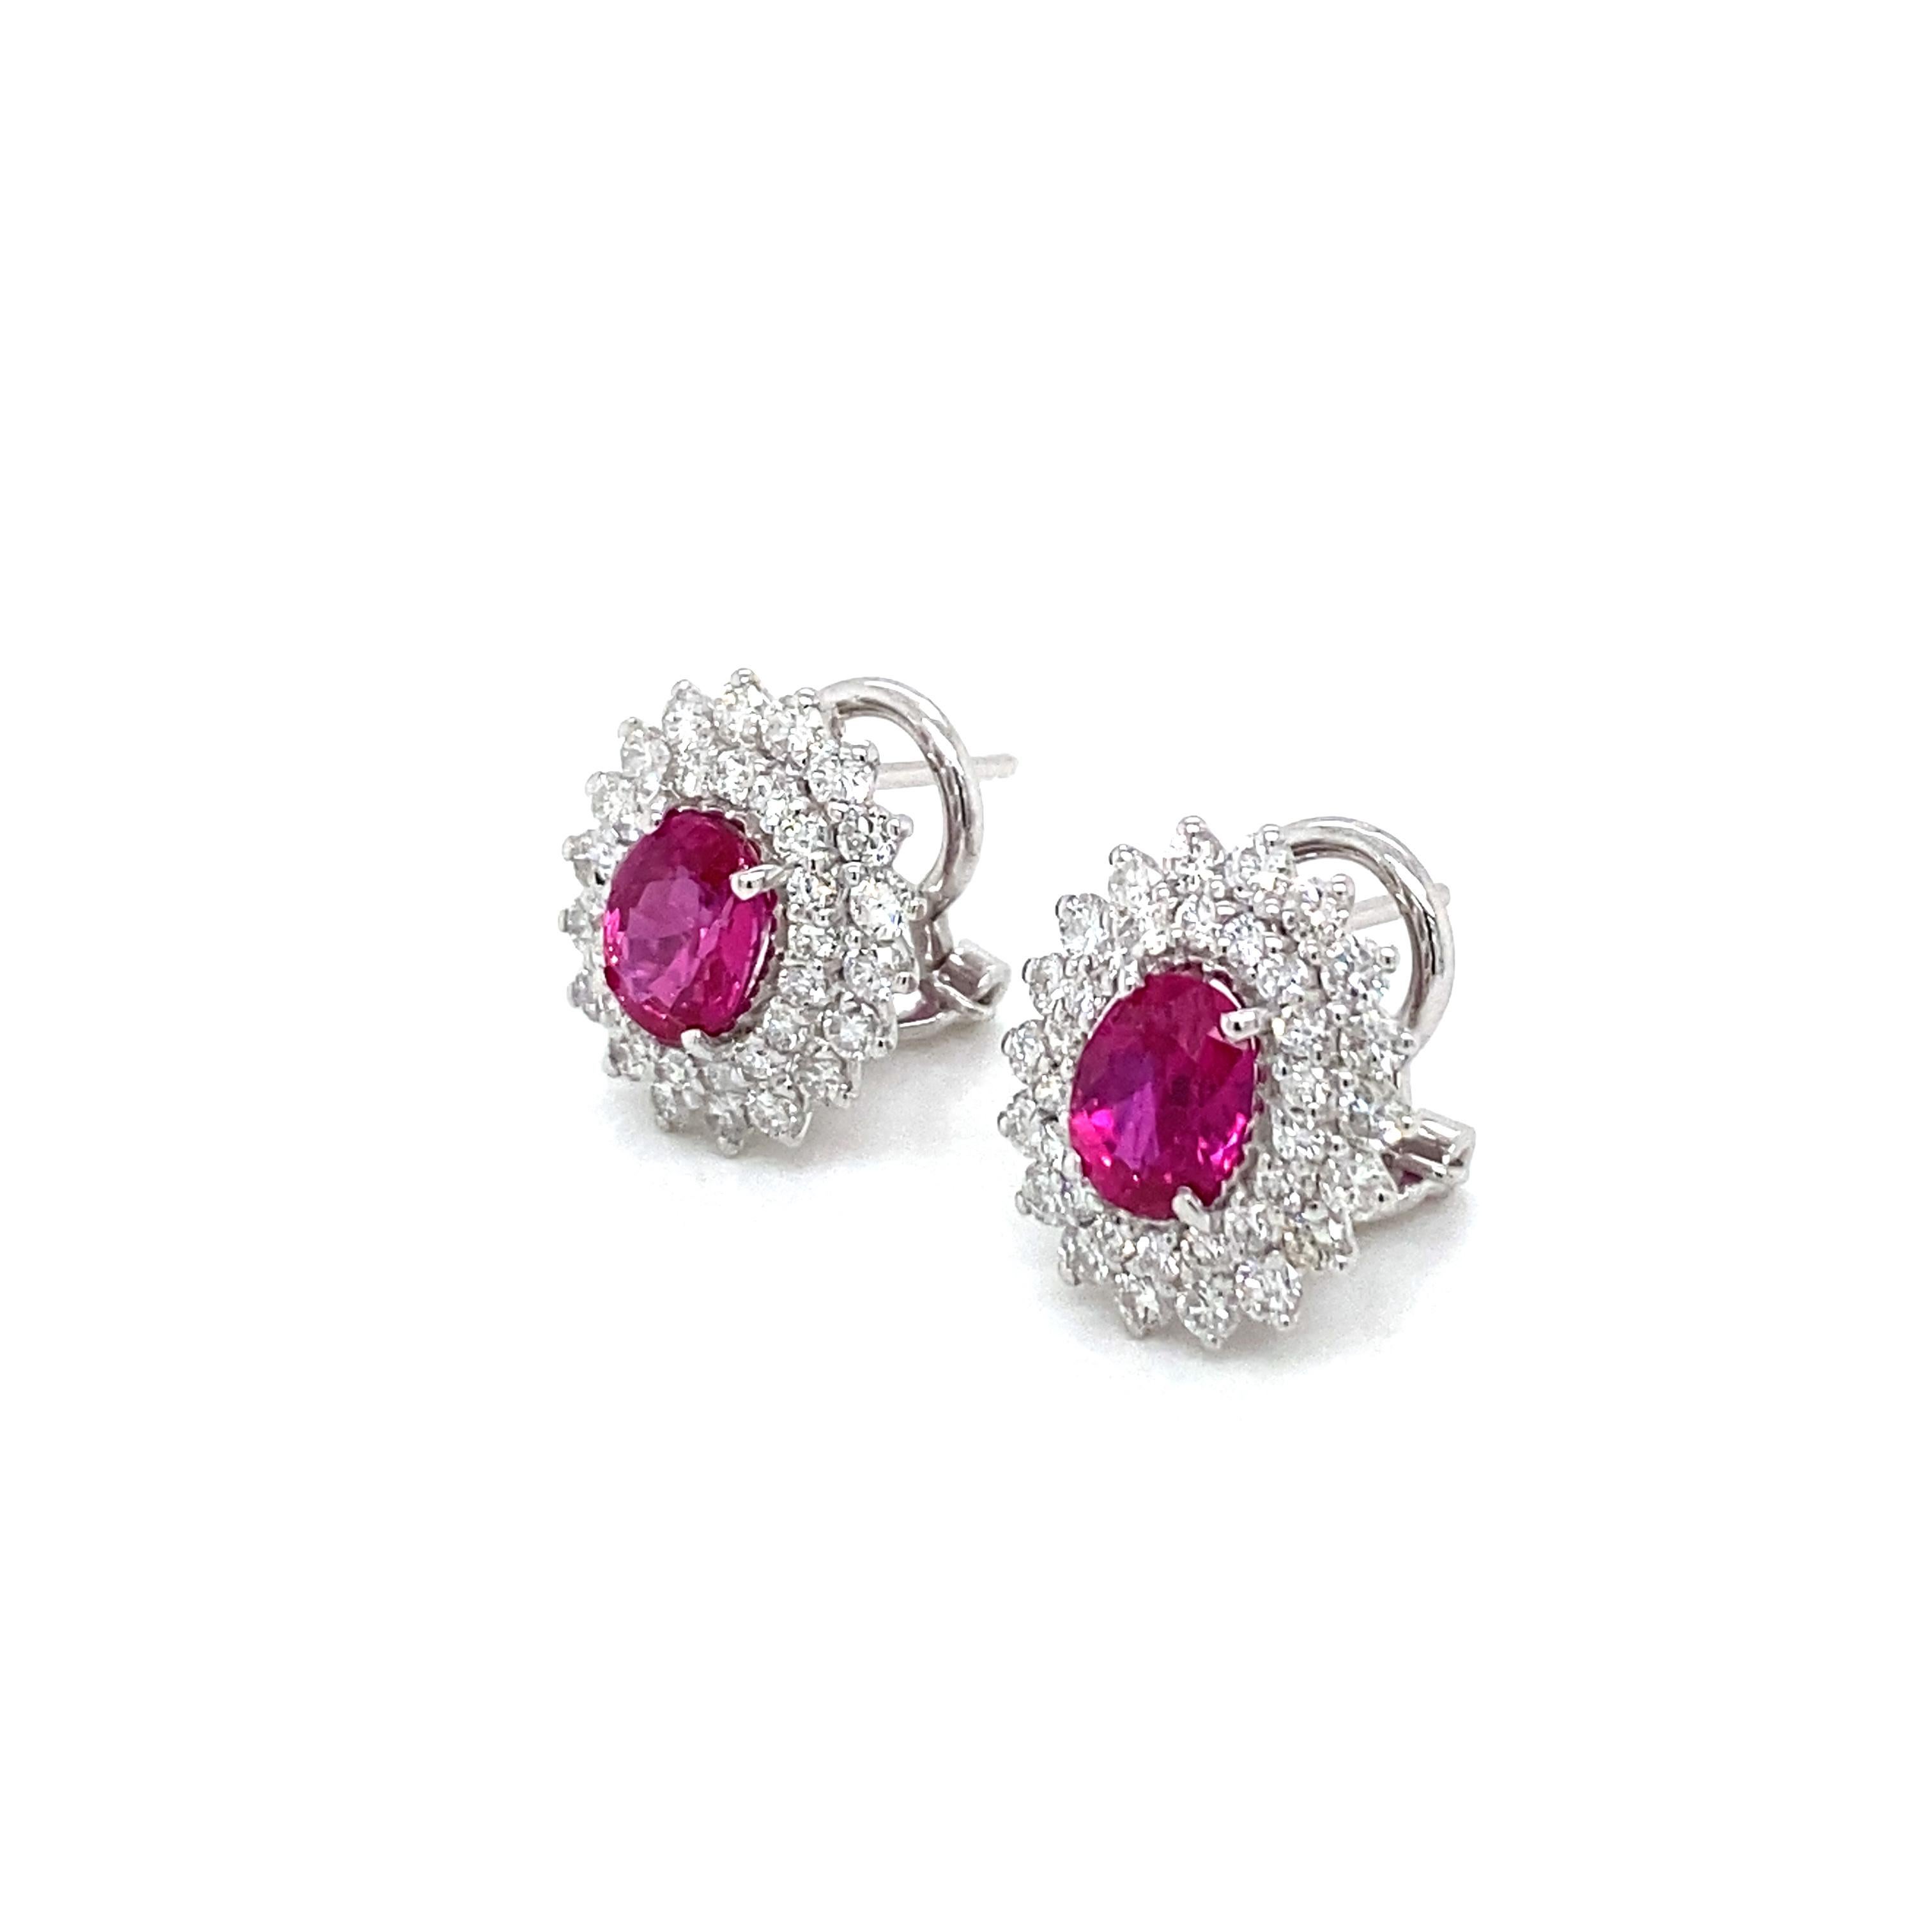 Vintage 2 Carat Ruby Diamond Gold Cluster Stud Earrings In Excellent Condition For Sale In Napoli, Italy